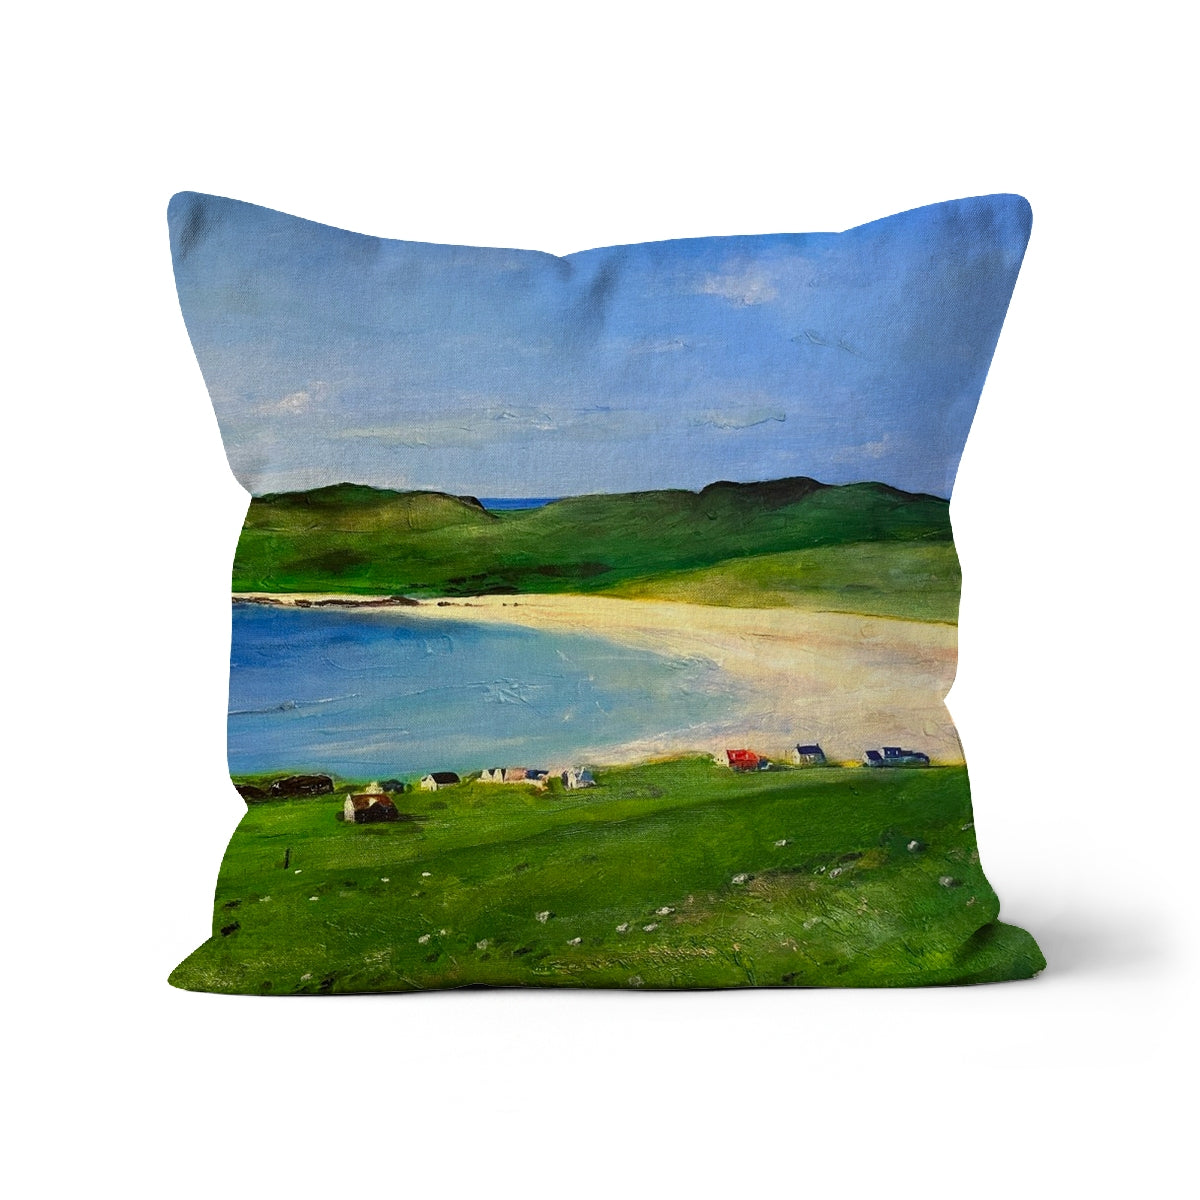 Balephuil Beach Tiree Art Gifts Cushion-Cushions-Hebridean Islands Art Gallery-Faux Suede-22"x22"-Paintings, Prints, Homeware, Art Gifts From Scotland By Scottish Artist Kevin Hunter